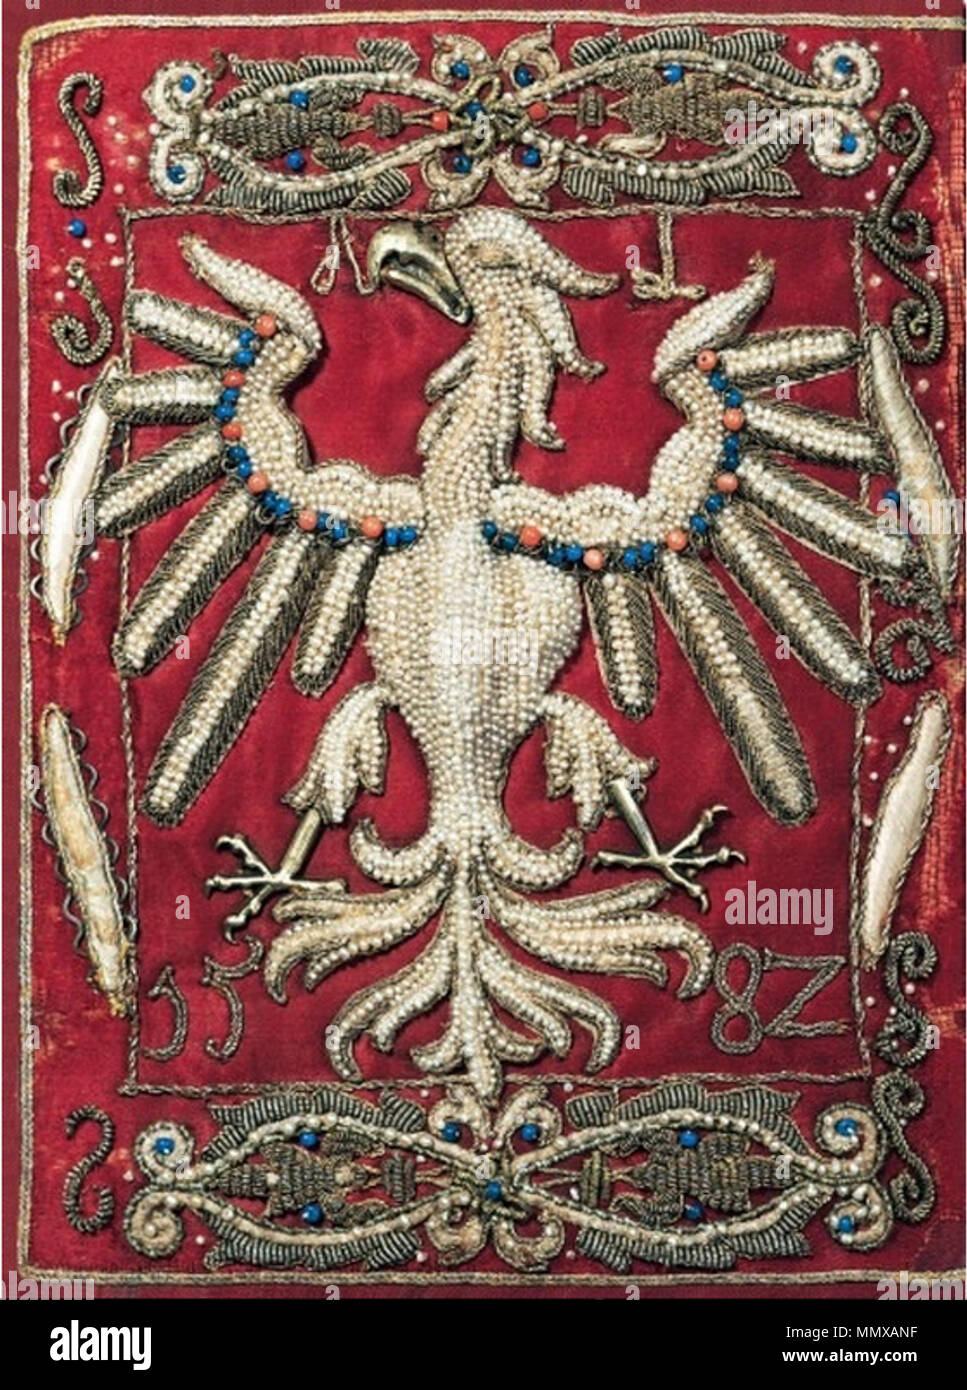 . Embroidered Polish eagle on a book from by Anna Jagiellon's library, known as prayer book of Anna Jagiellon. Embroidered Polish eagle by Anna Jagiellon Stock Photo